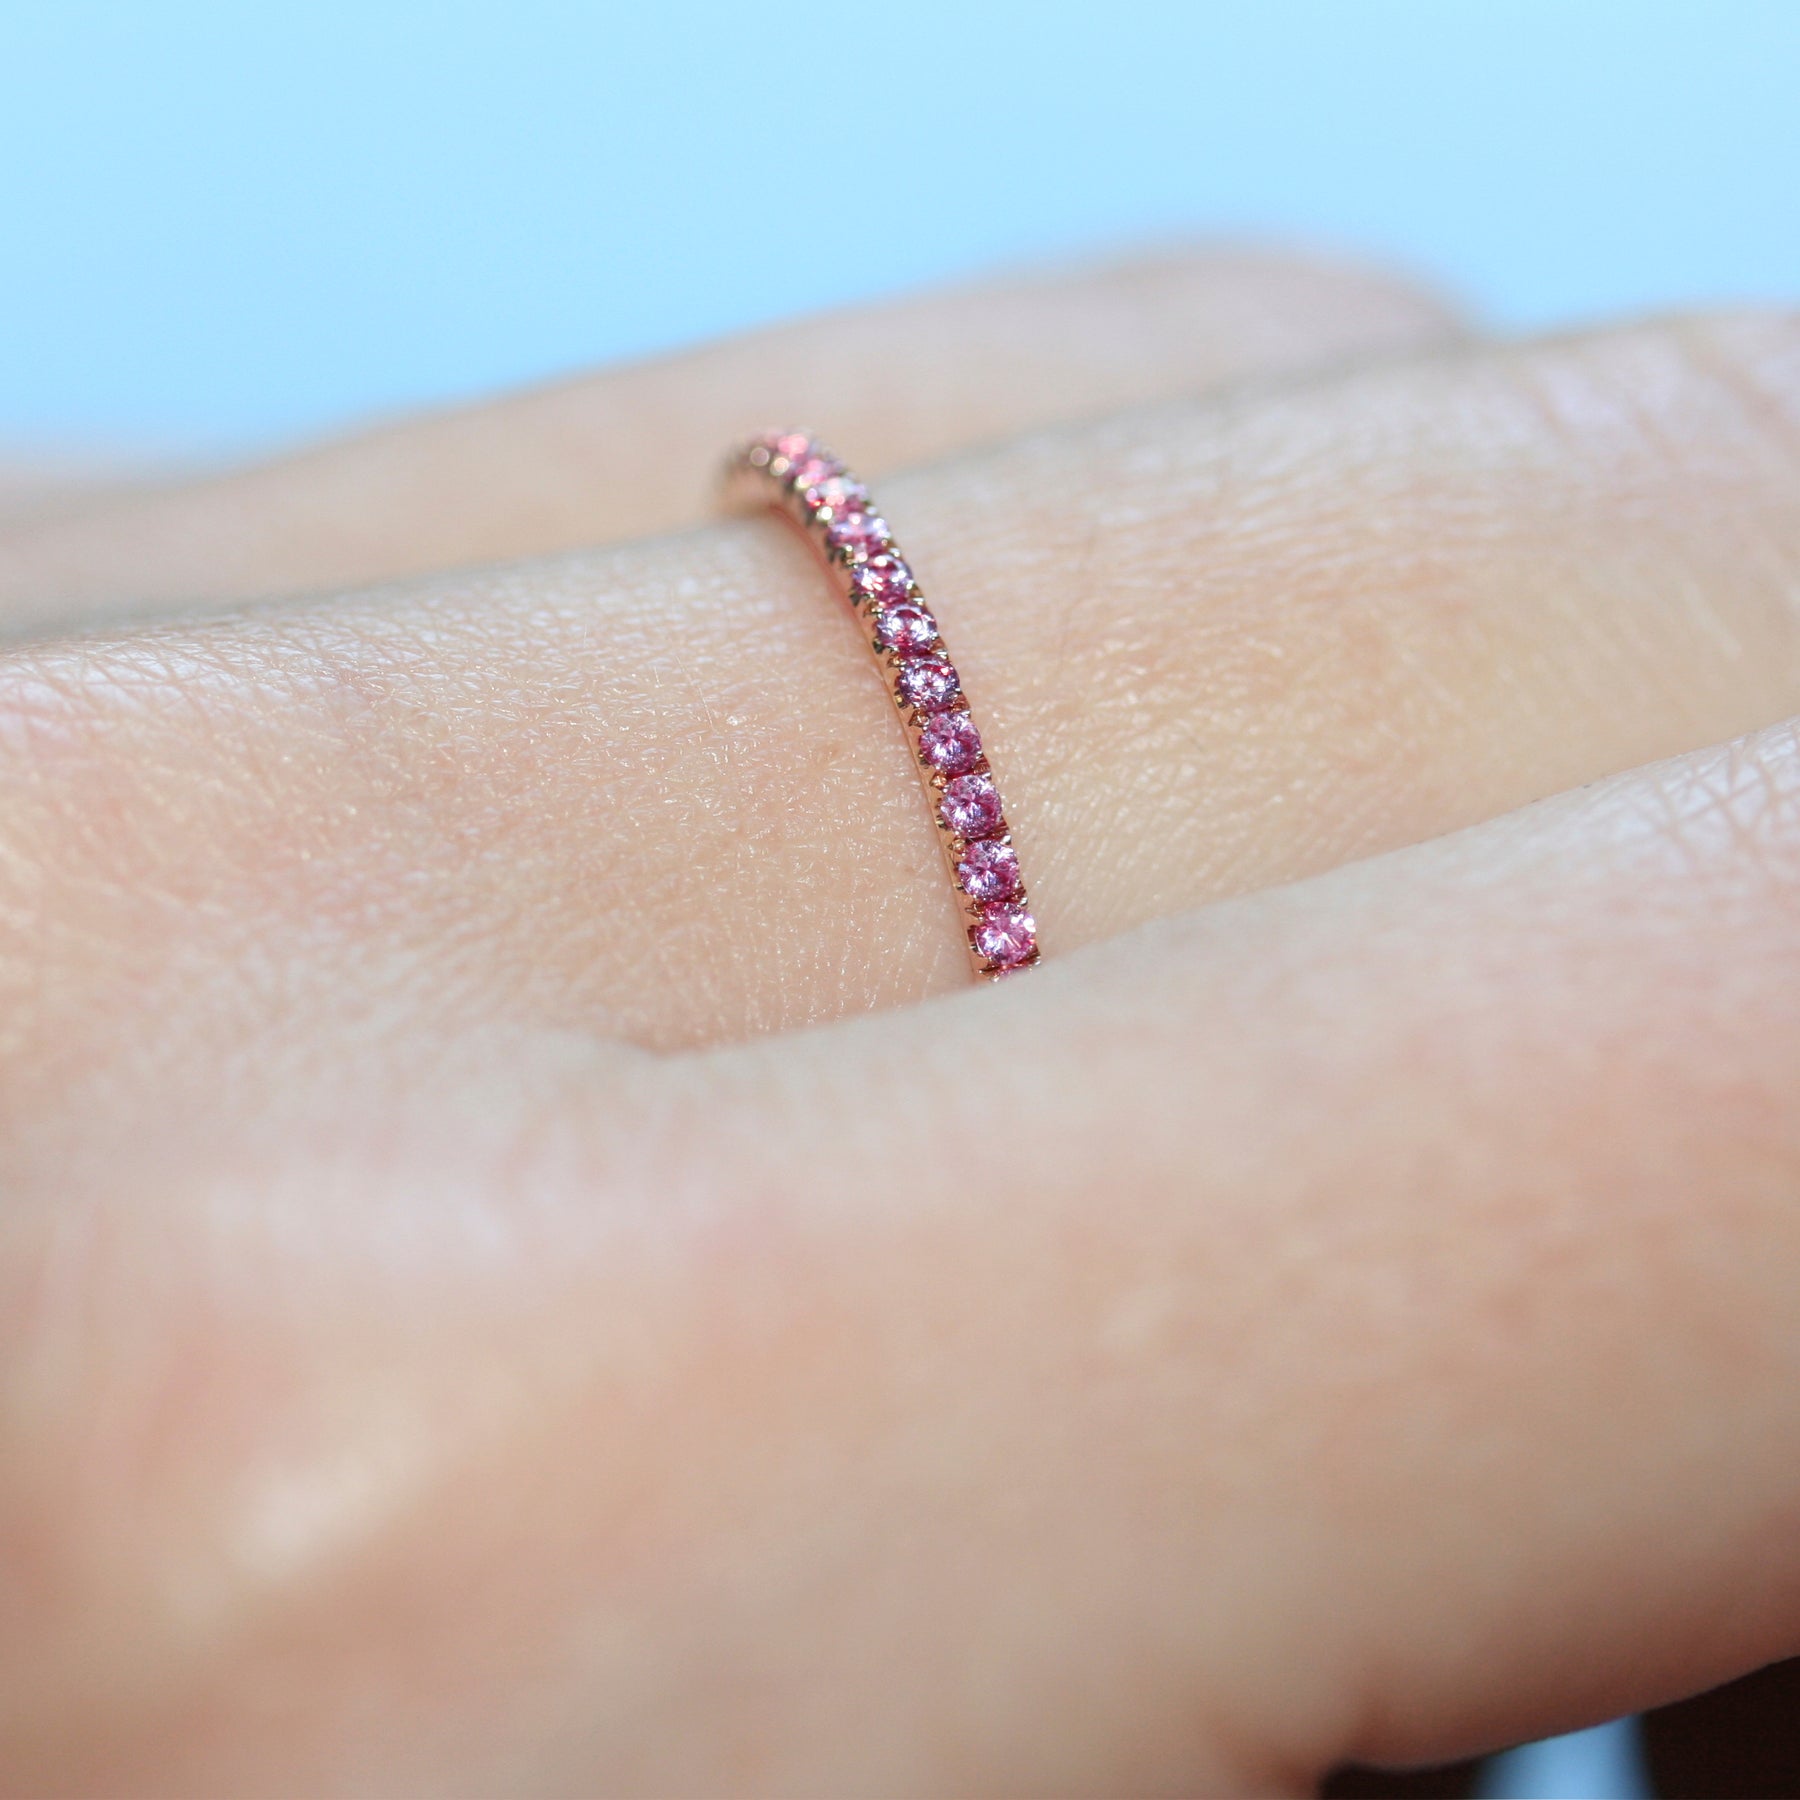 pink sapphire full eternity ring 18ct white gold